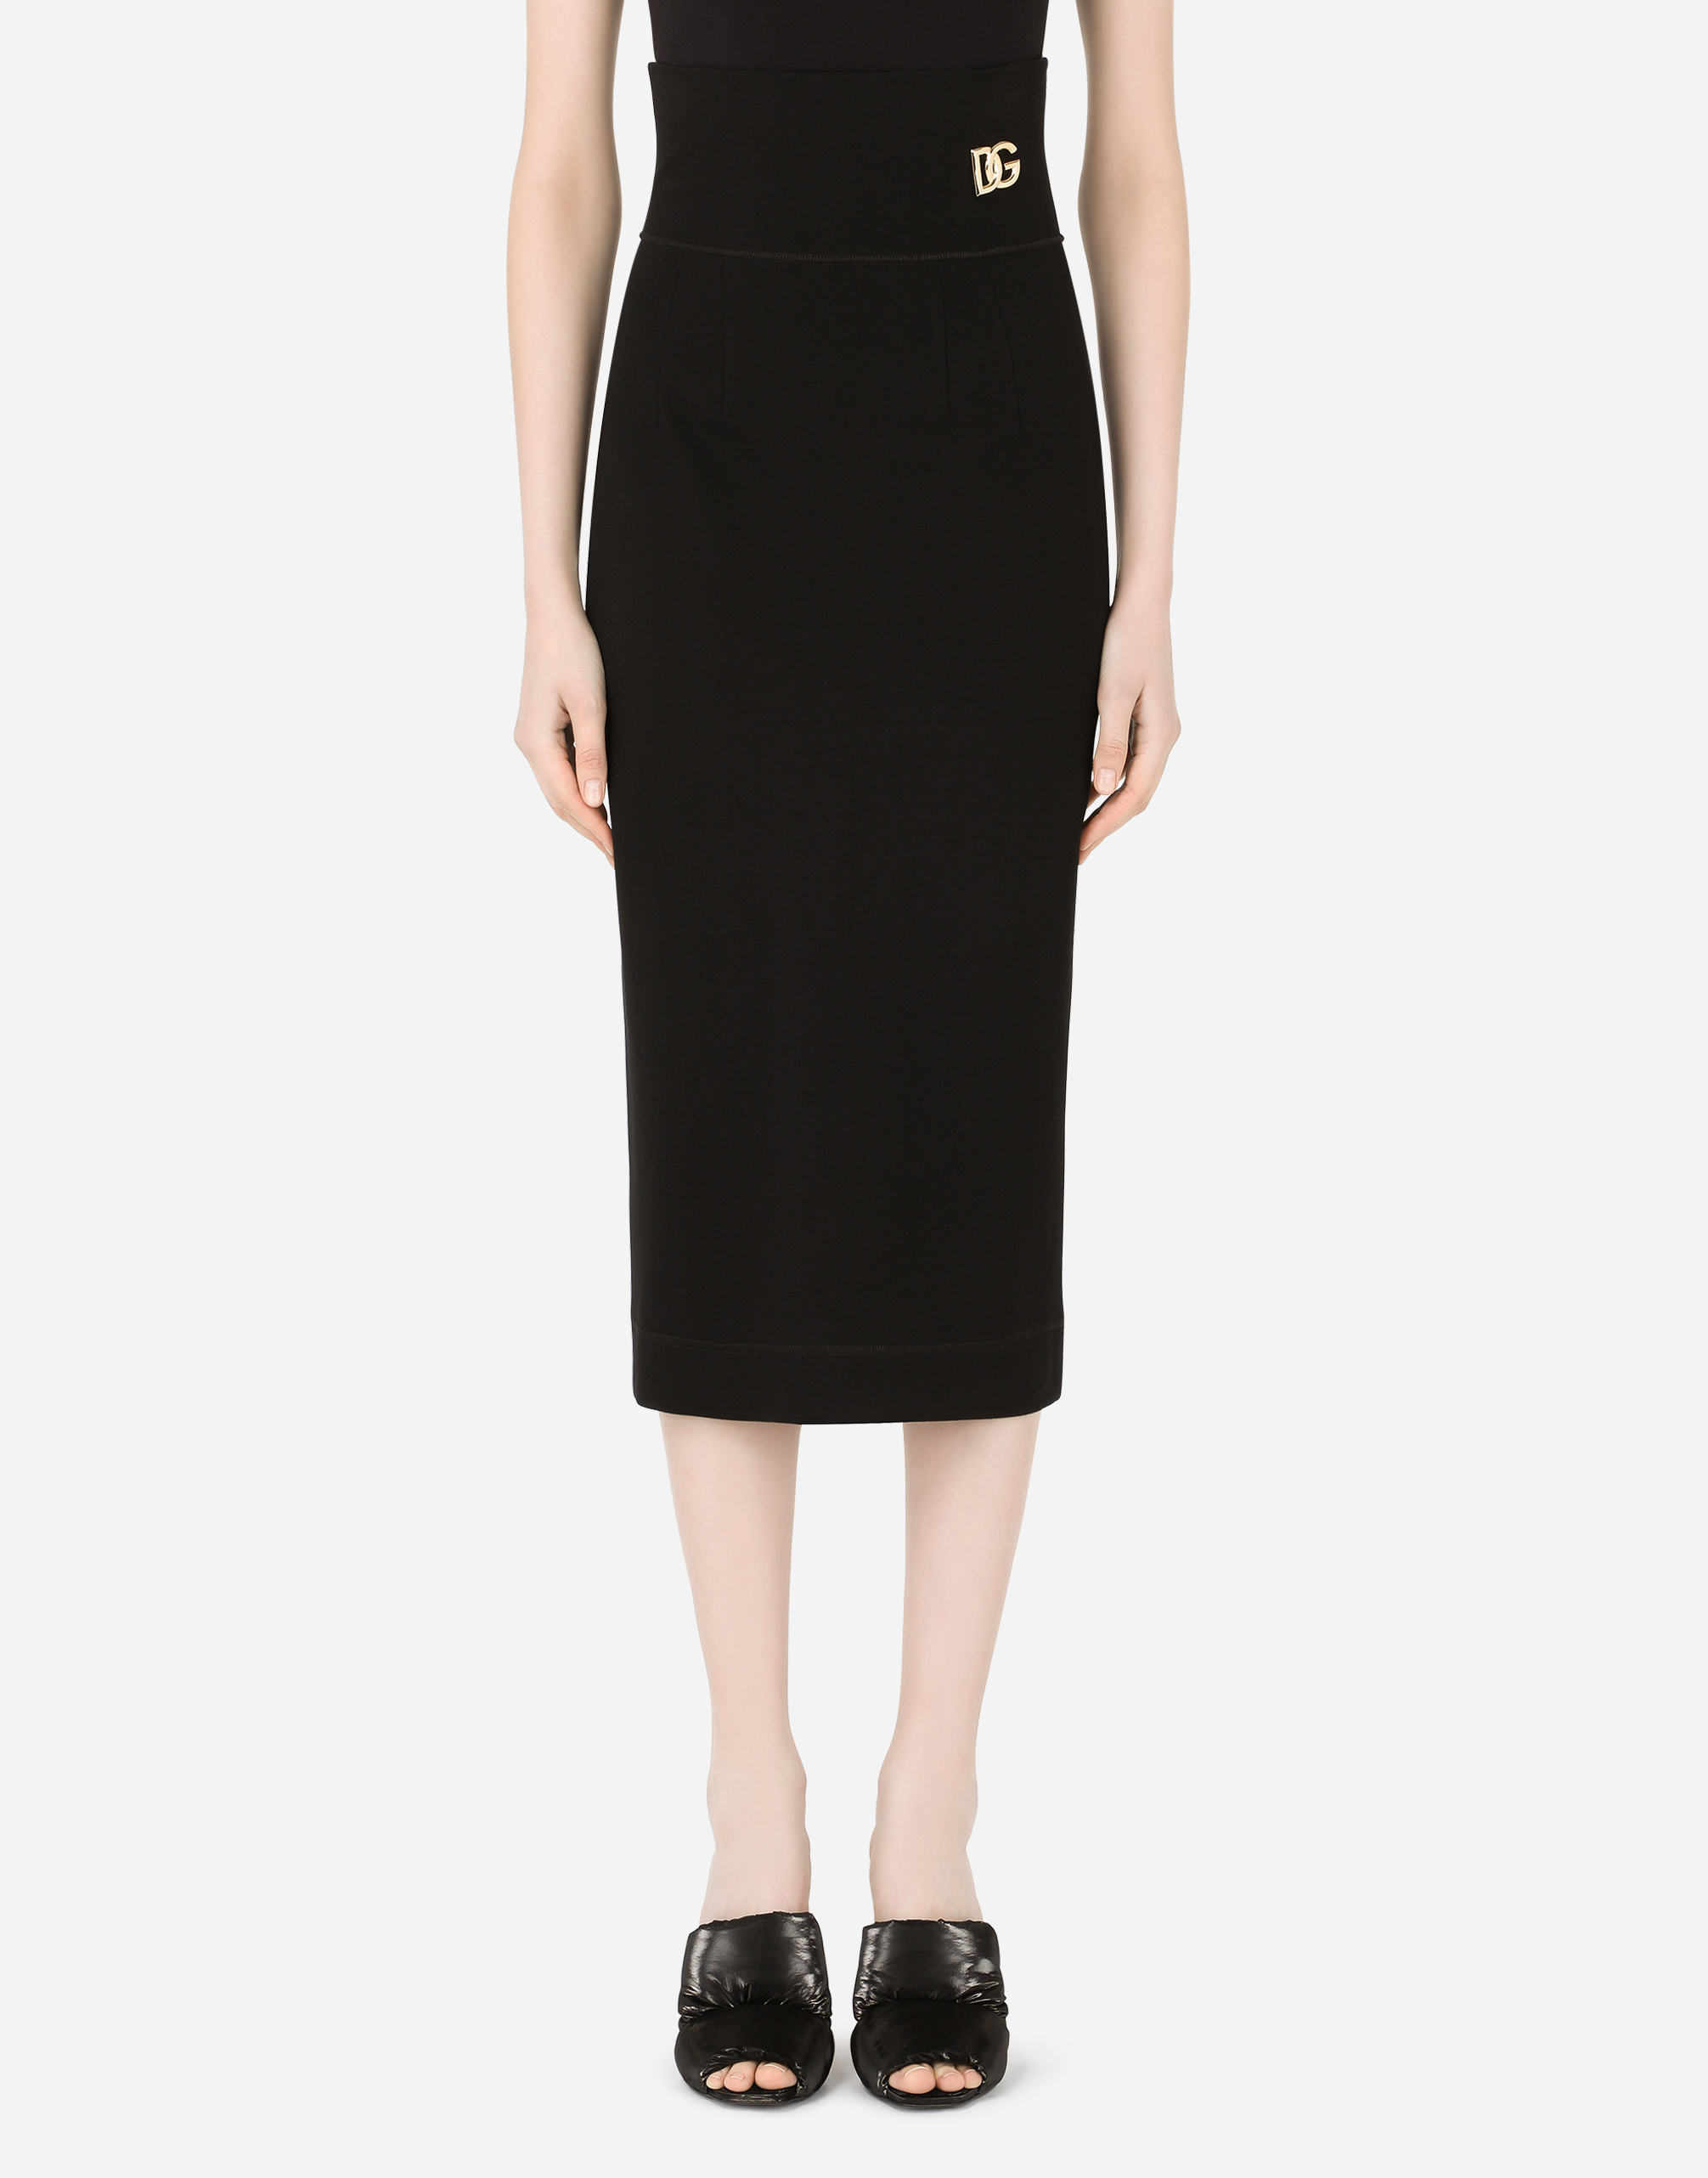 Jersey pencil skirt with DG embellishment in Black